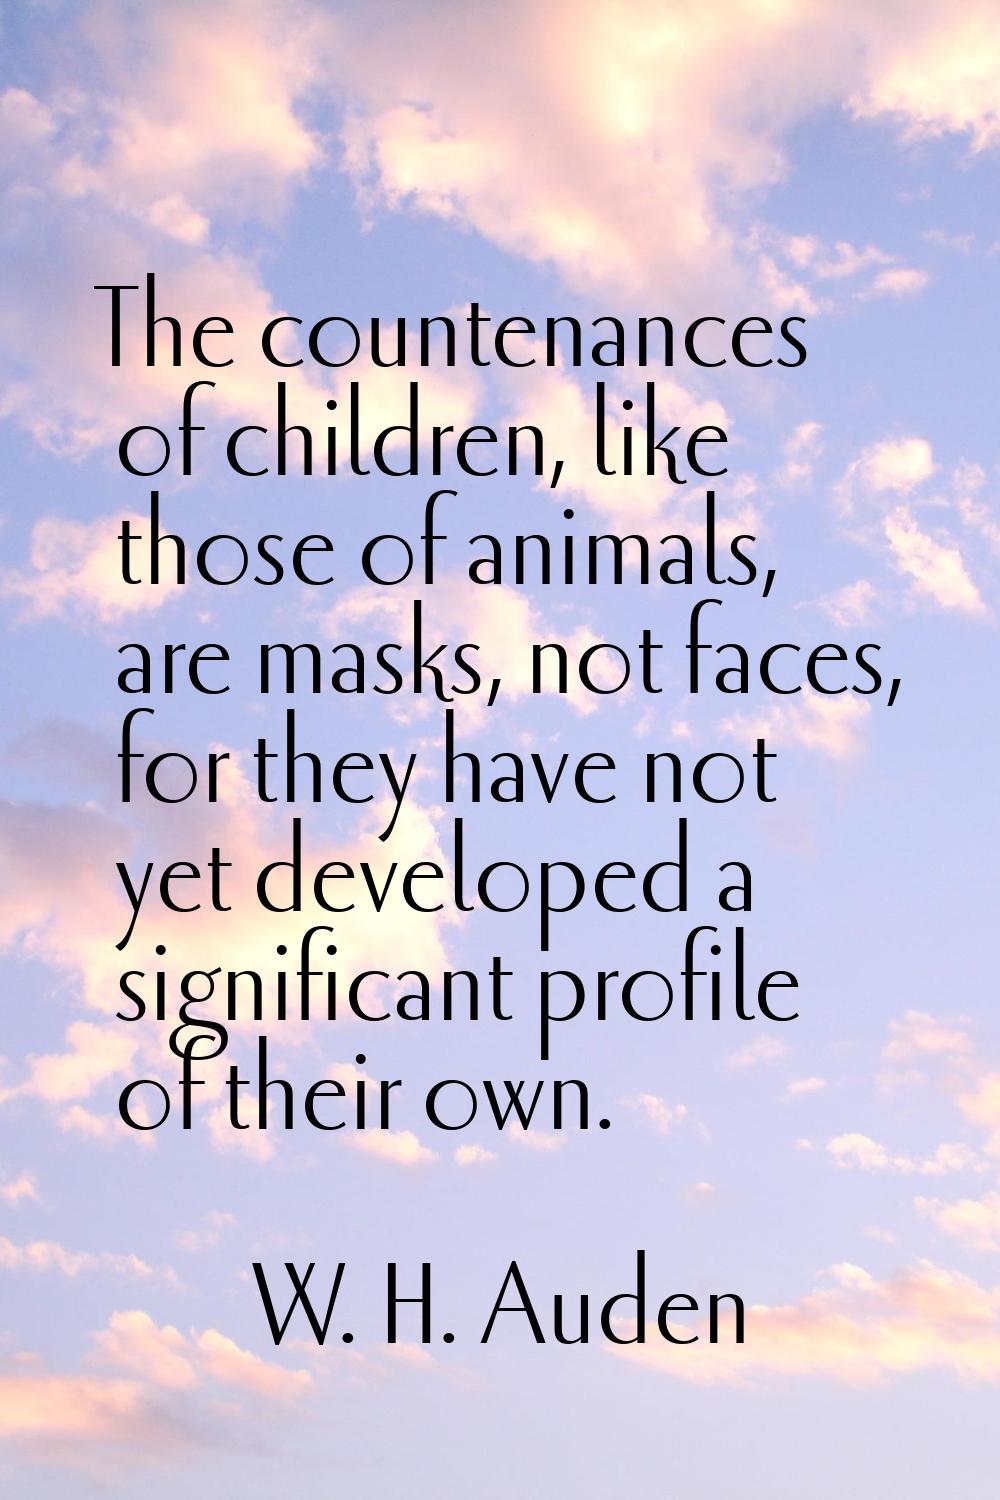 The countenances of children, like those of animals, are masks, not faces, for they have not yet de